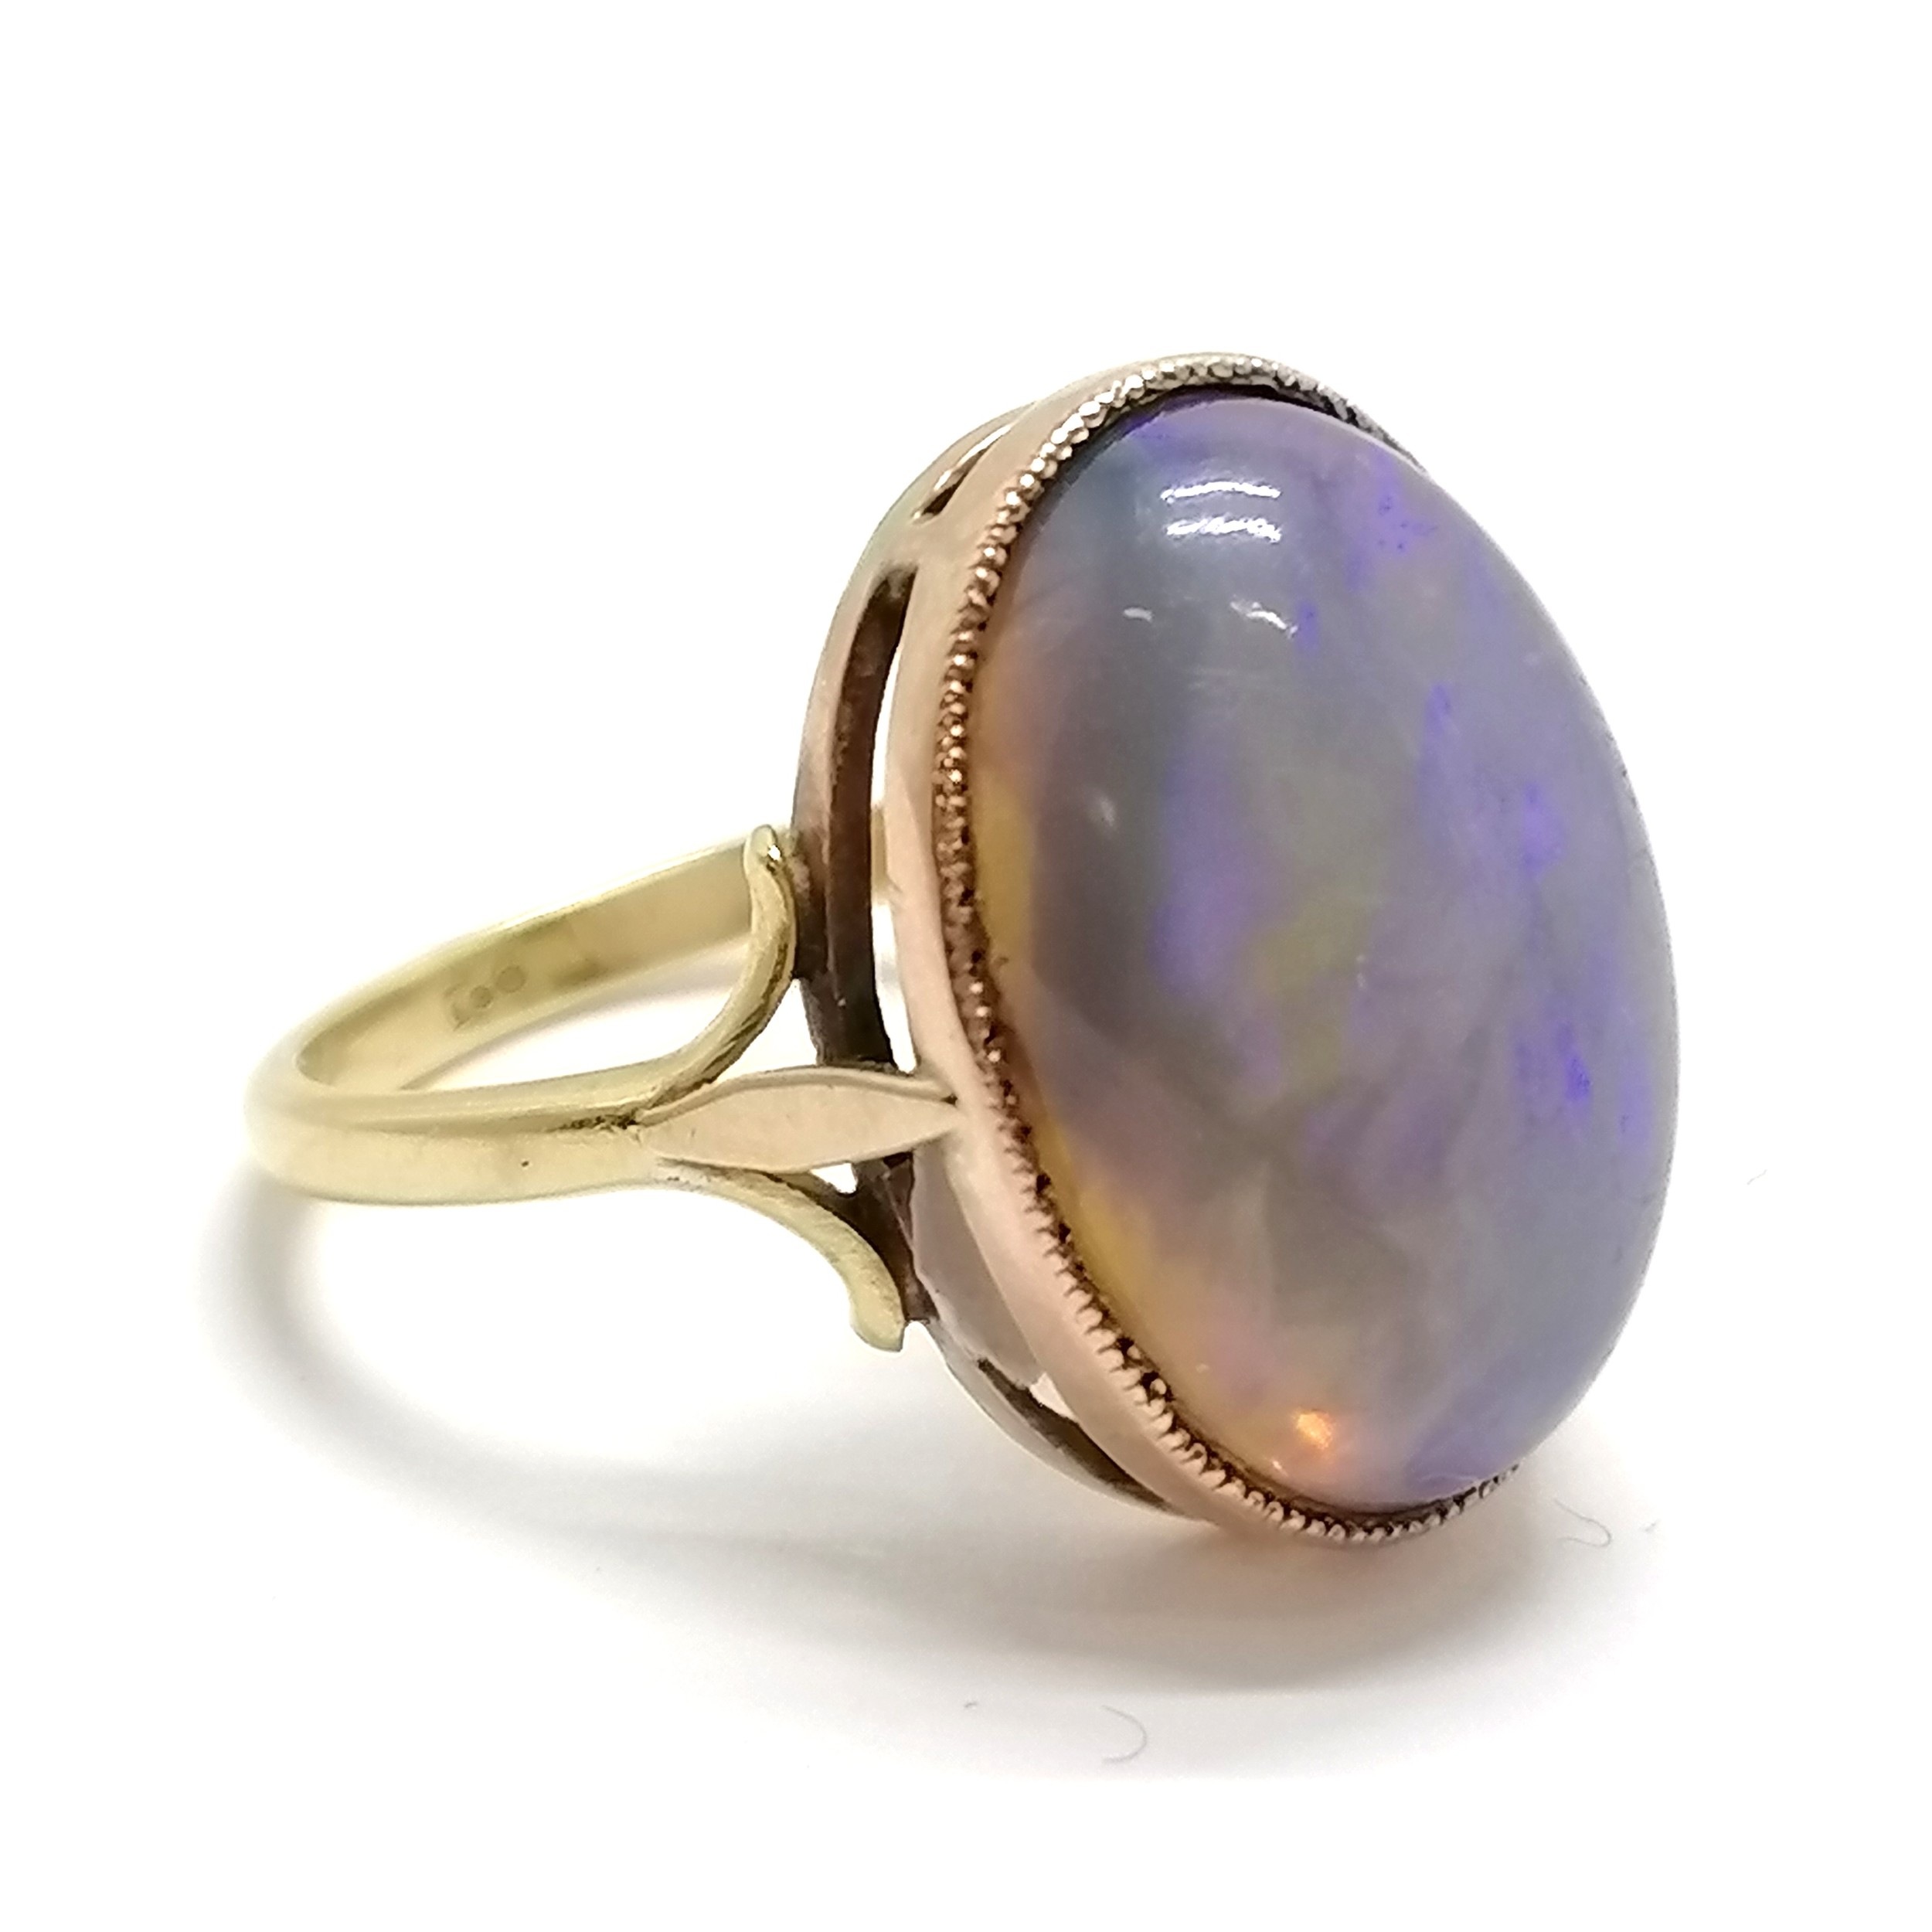 9ct marked gold cabochon opal stone set ring - size P½ & 4.8g total weight ~ stone has light surface